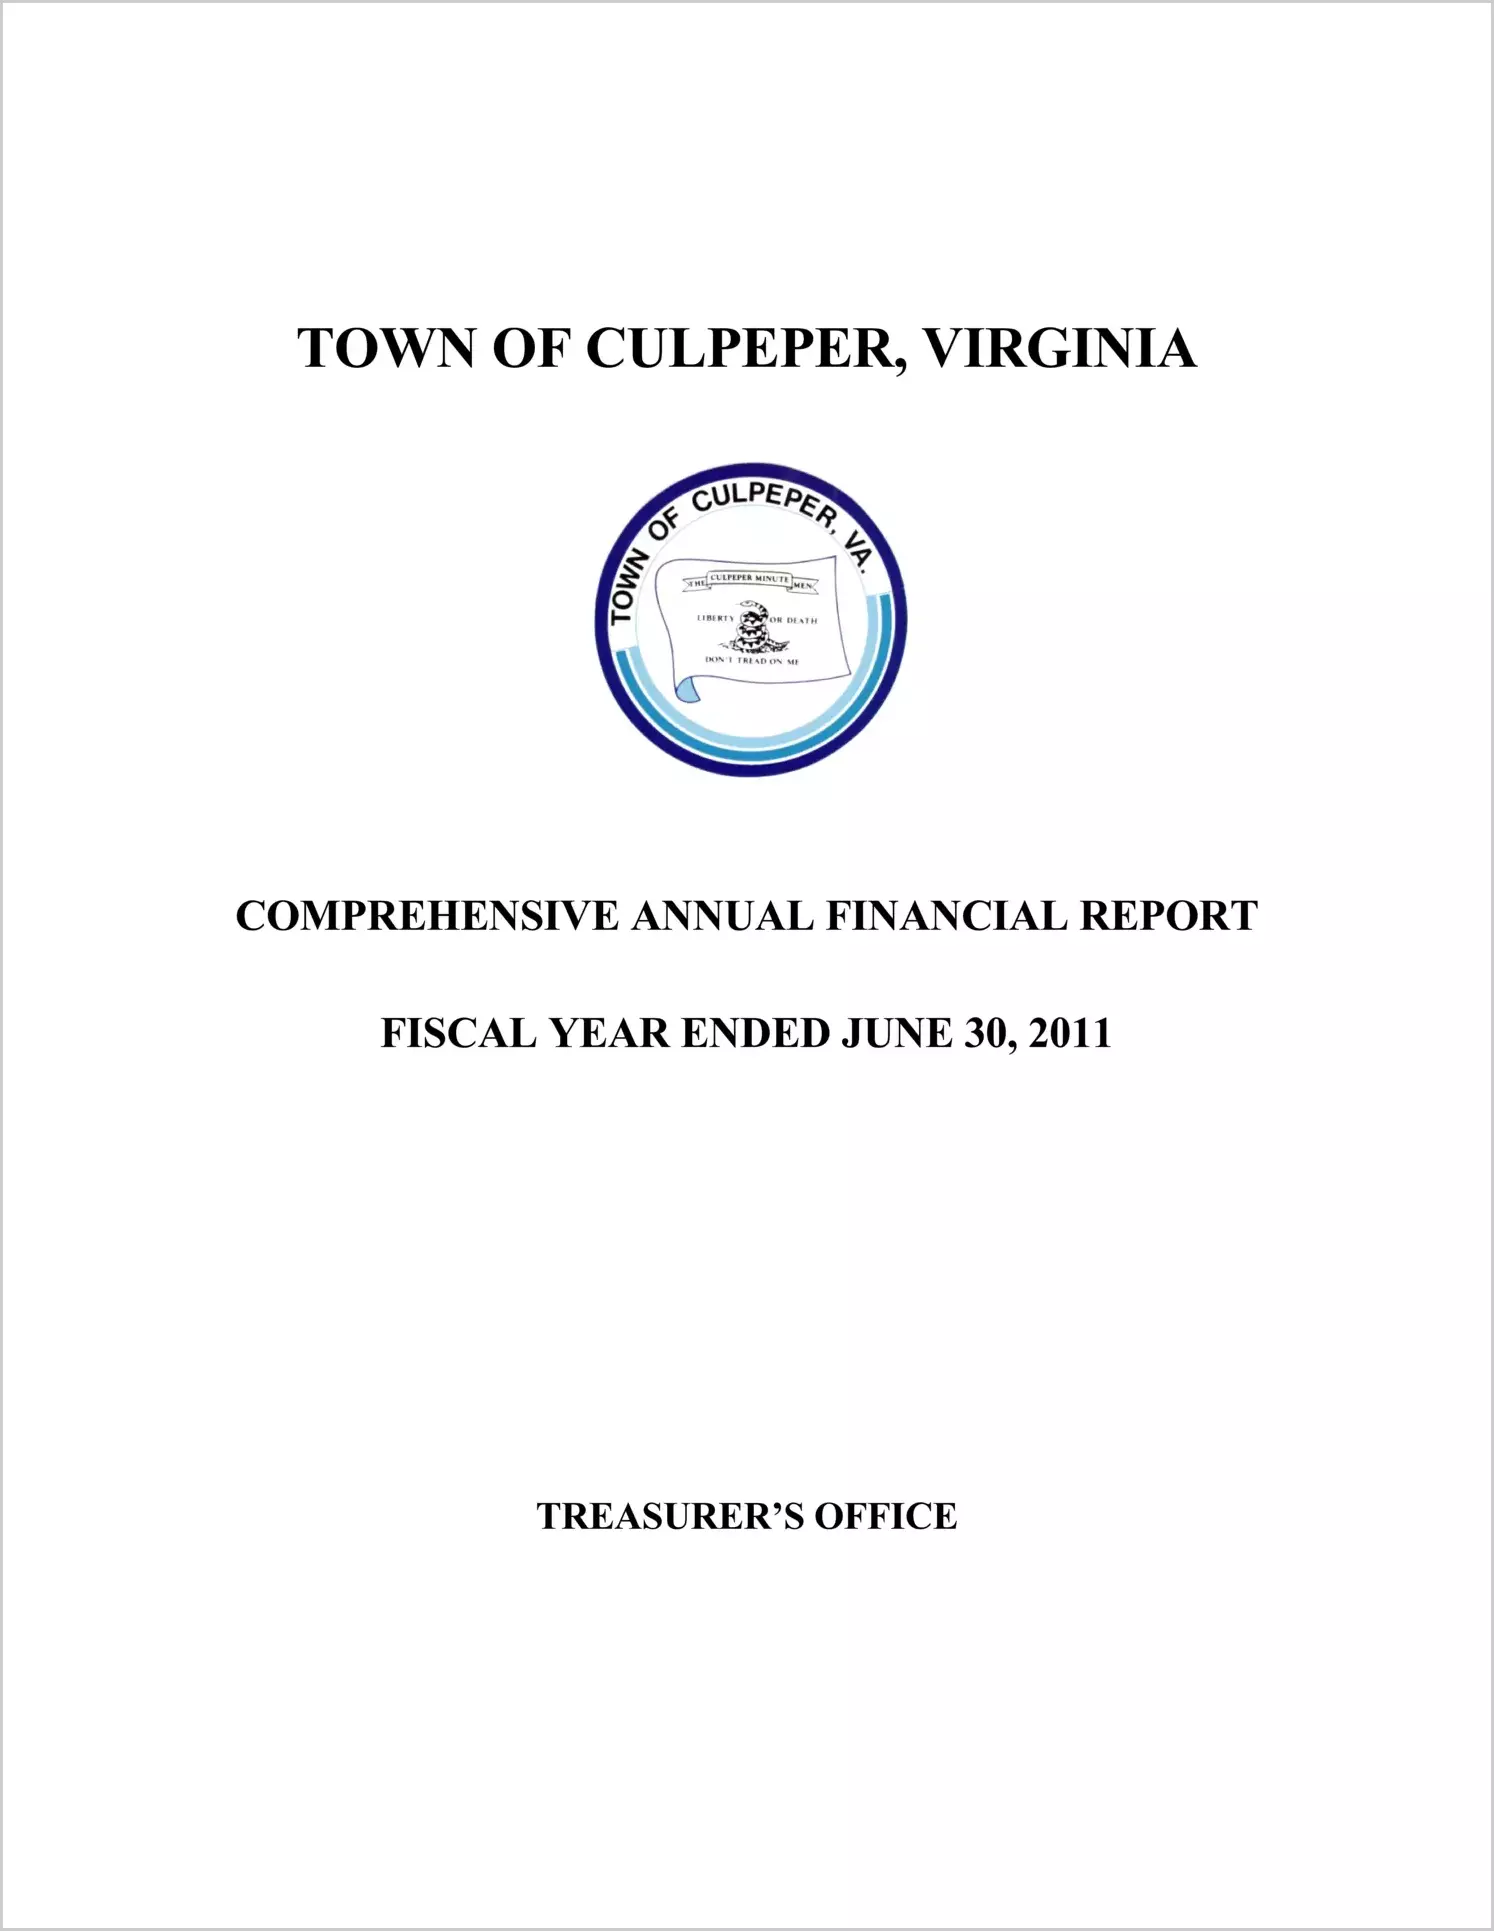 2011 Annual Financial Report for Town of Culpeper